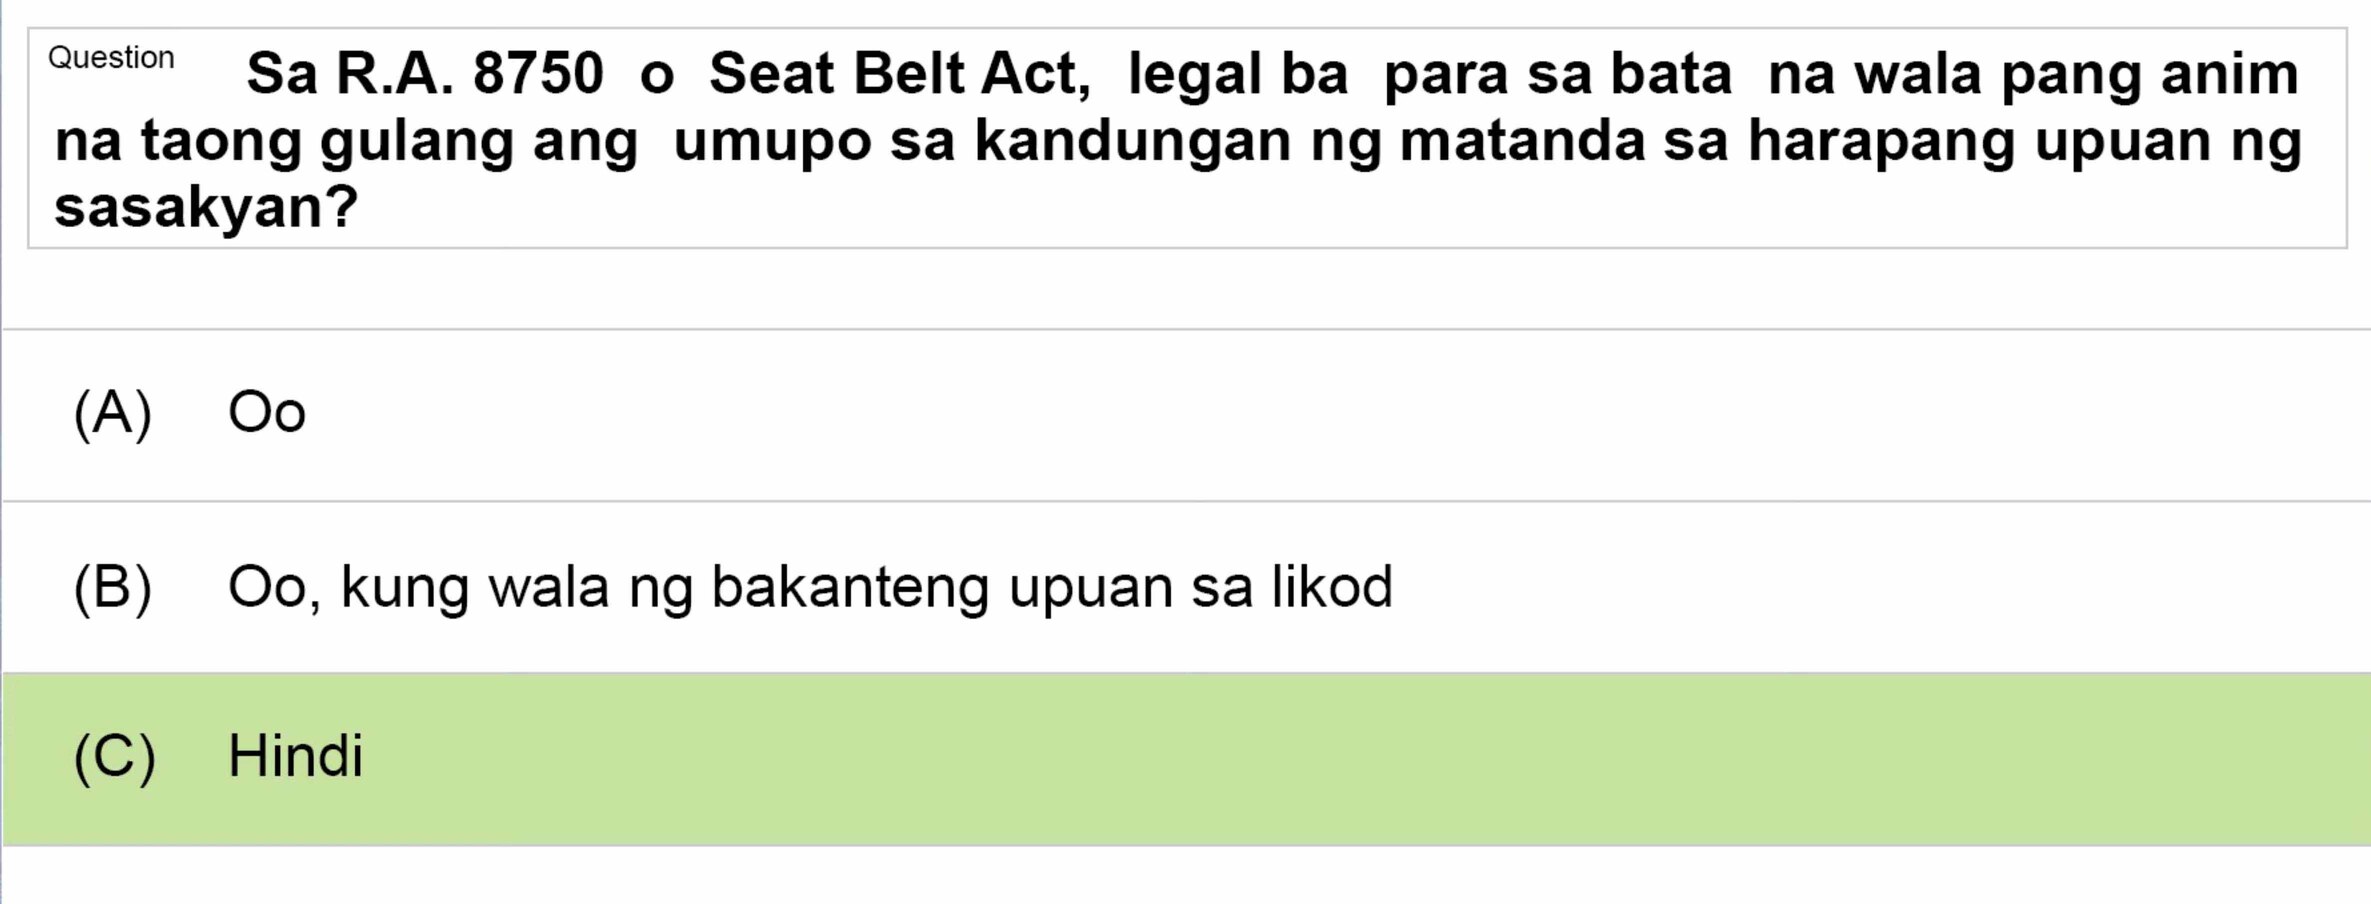 LTO Tagalog non professional exam reviewer light vehicle 1 (33)